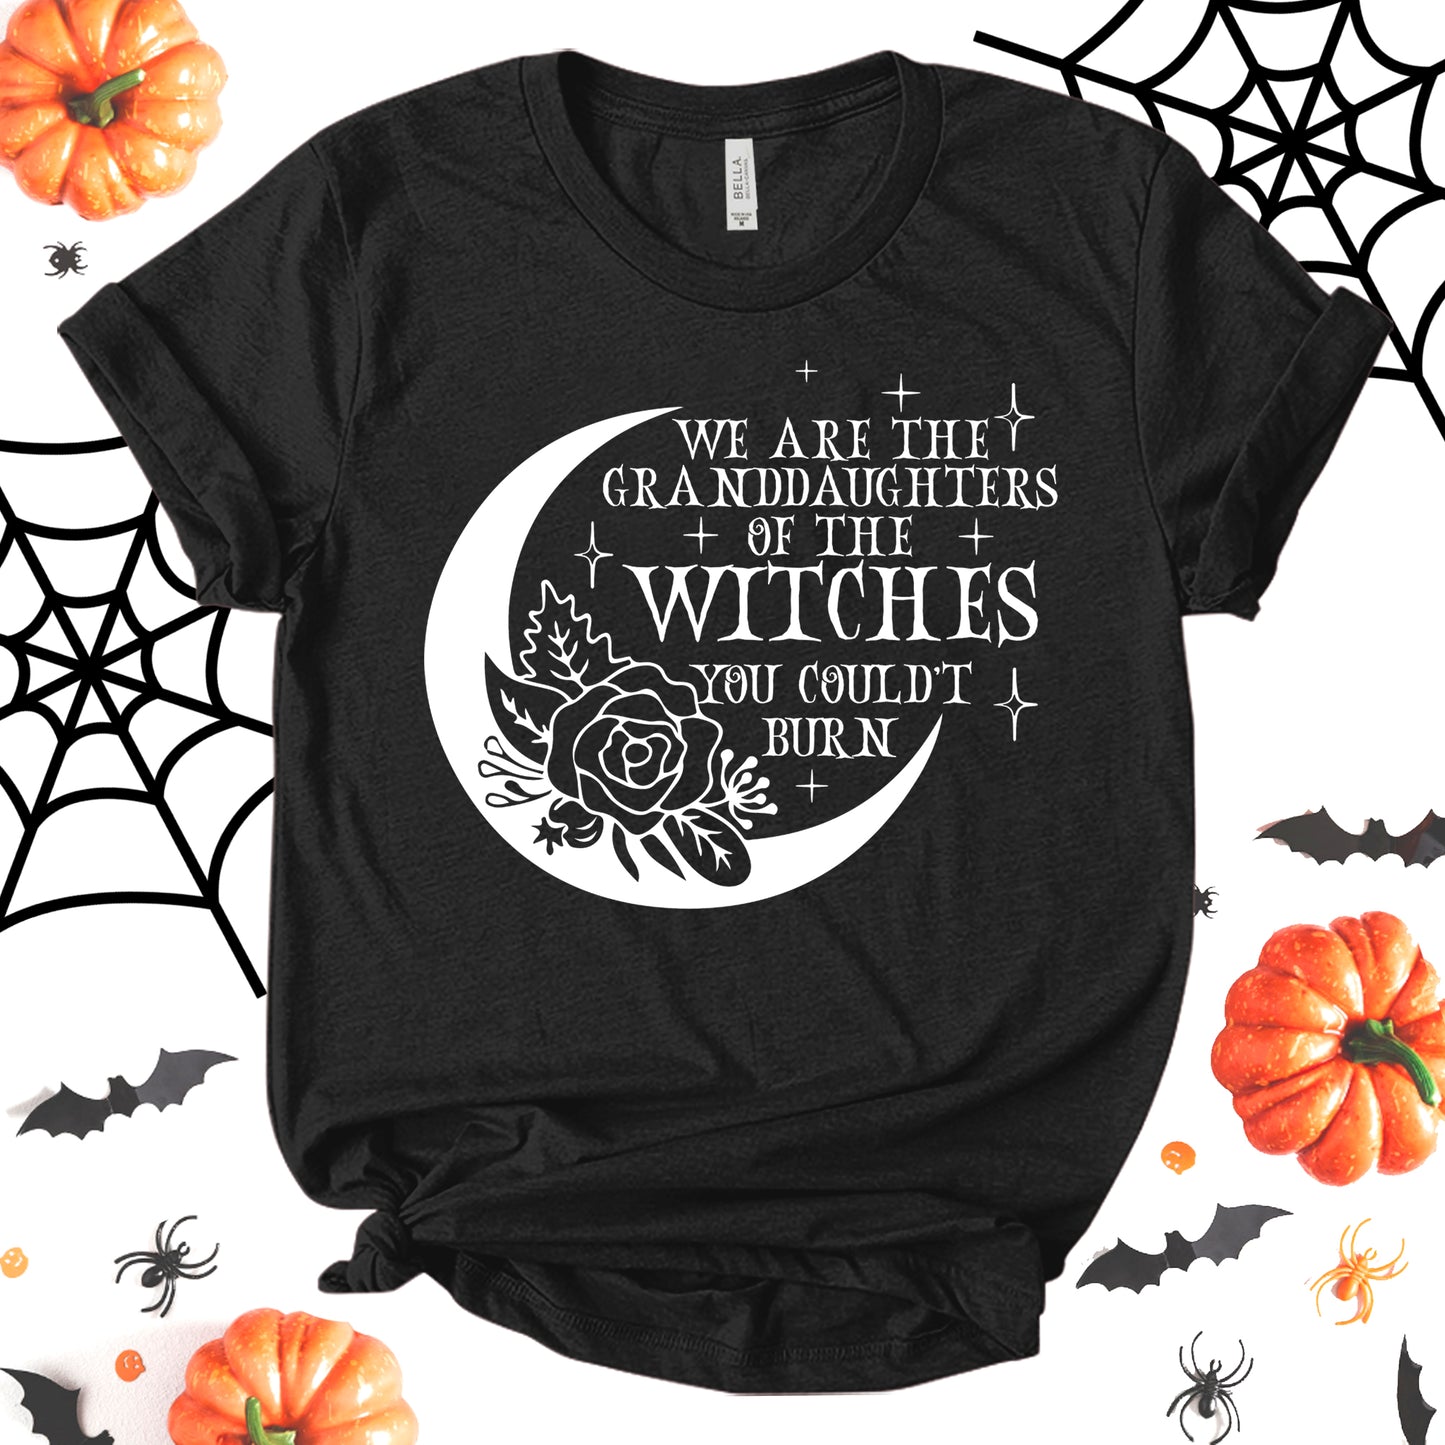 We Are The Granddaughters Of The Witches You Couldn't Burn Shirt, Salem Witch Shirt, Funny Halloween Shirt, Mystic Shirt, Halloween Costume, Flower Shirt, Fall Shirt, Holiday Shirt, Unisex T-shirt